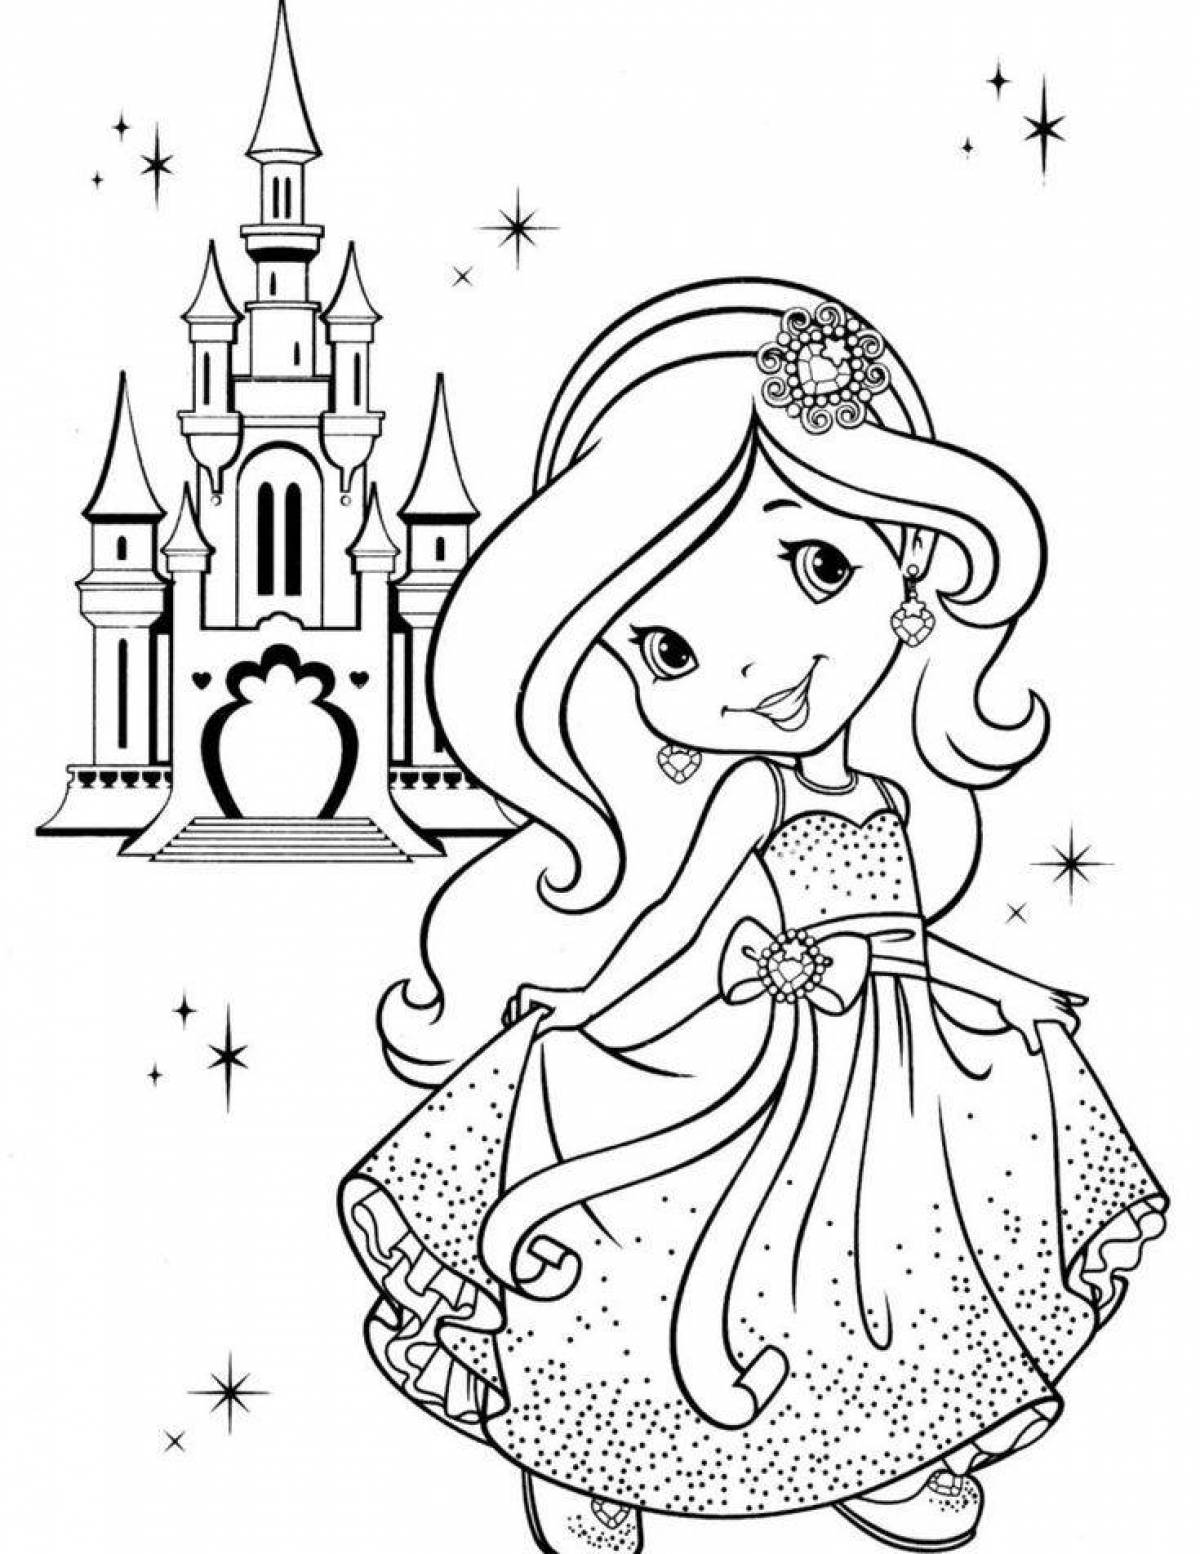 Shining princess coloring book for children 3-4 years old